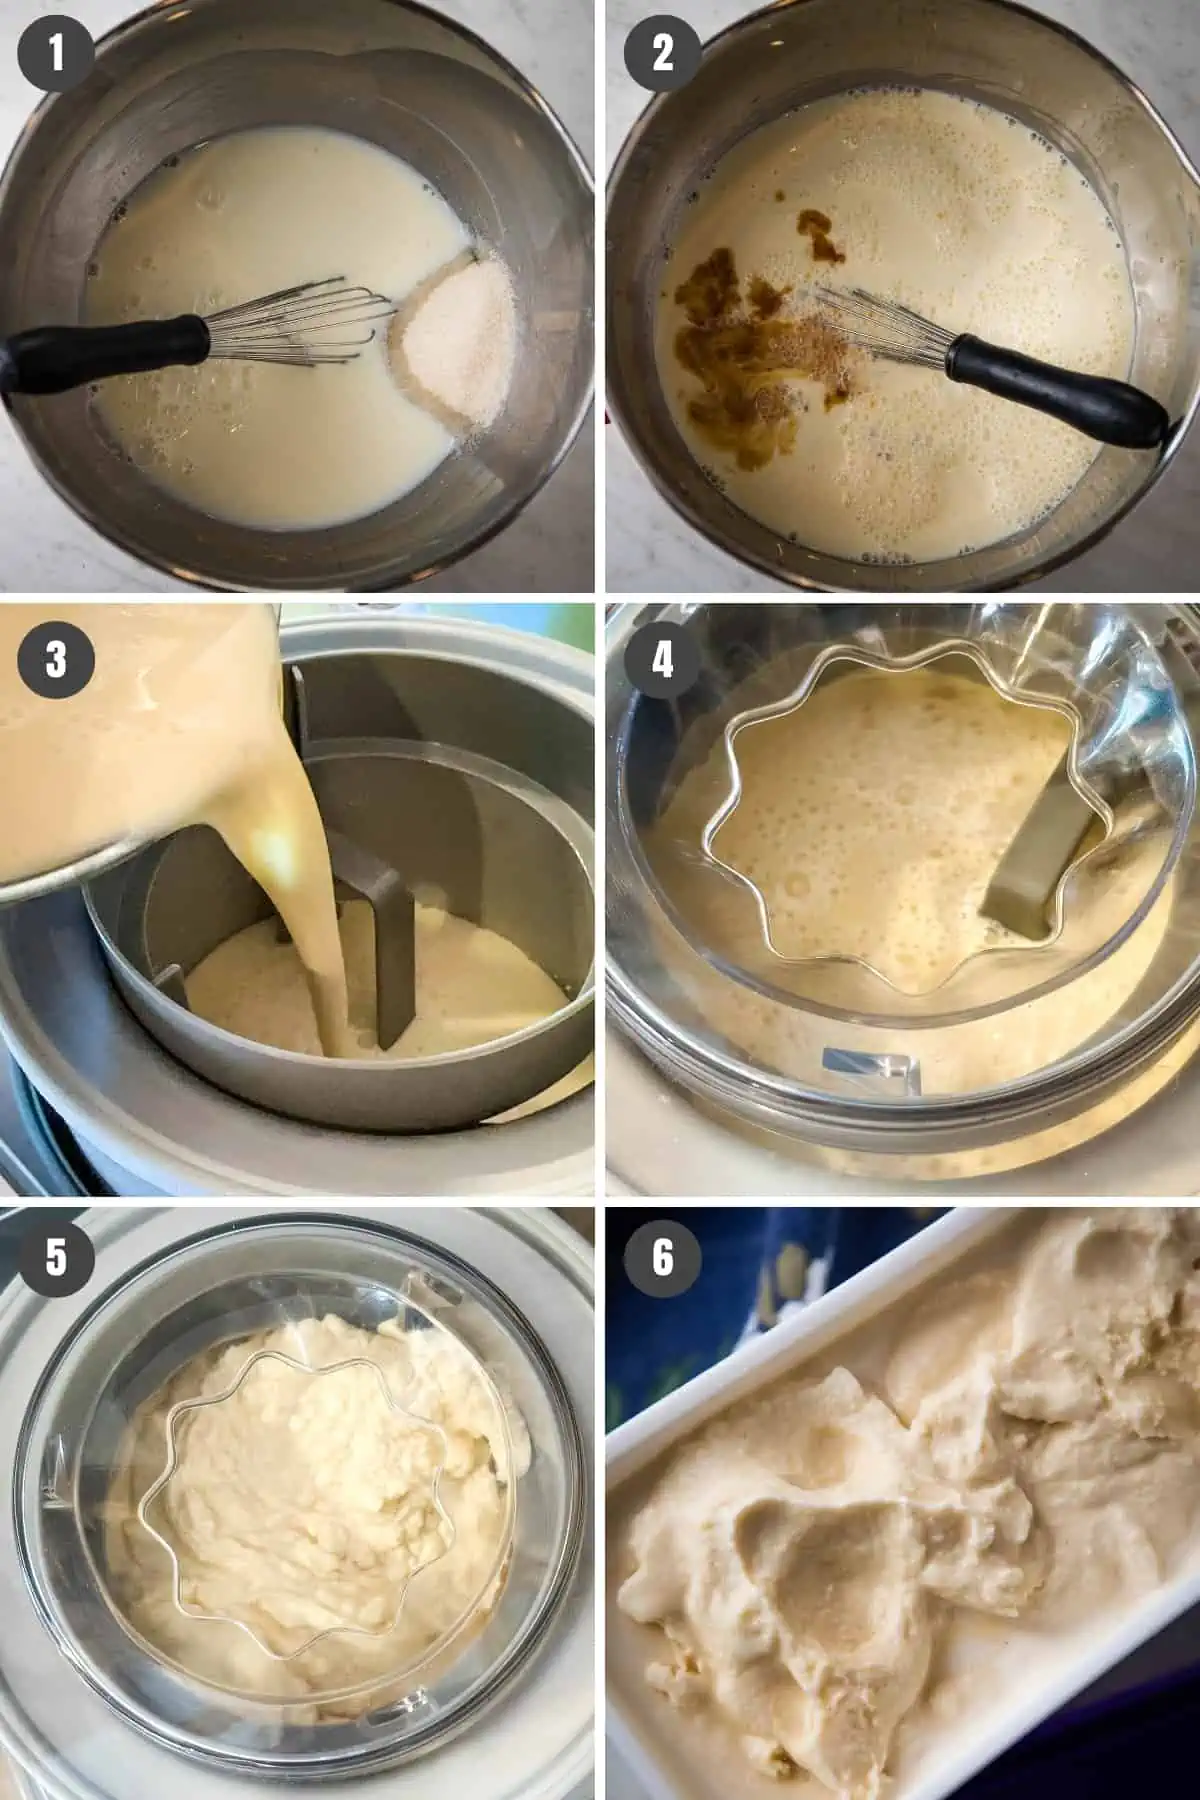 steps for how to make raw milk ice cream by mixing ingredients in mixing bowl, then pouring into freezer and freezing 'til thickens